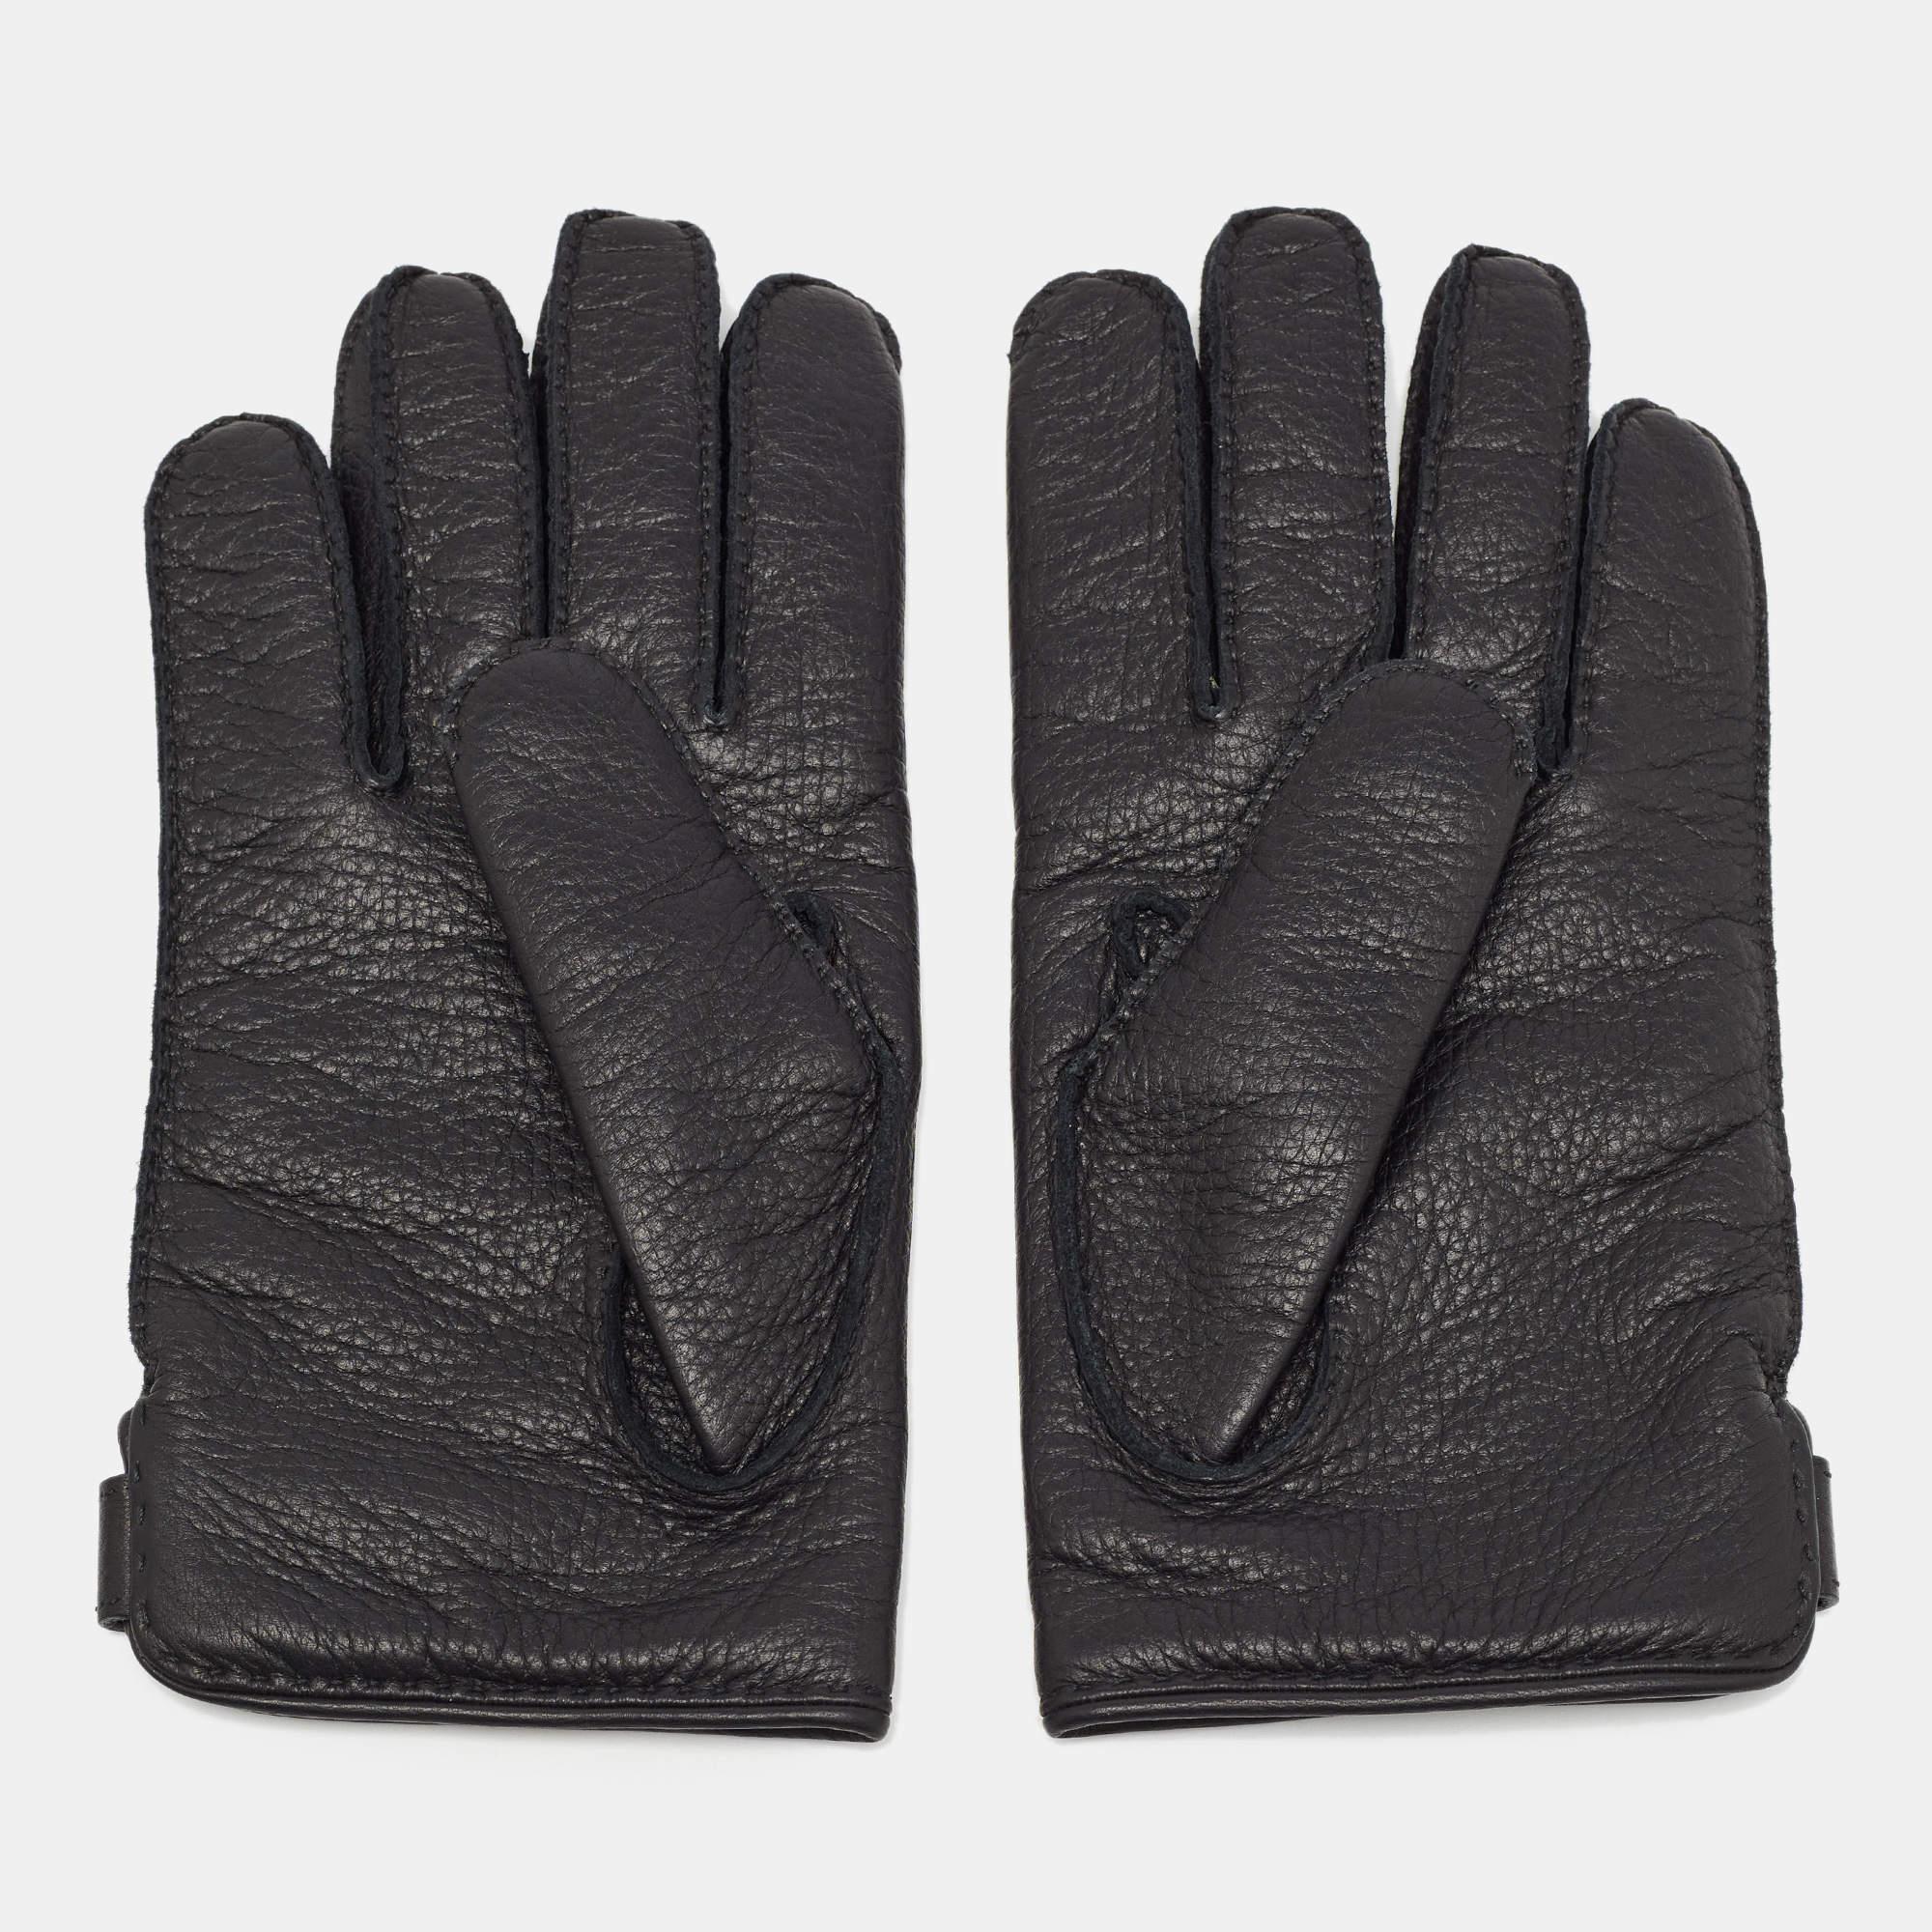 Hermes ensures you have fun styling these gloves and wearing them often. They're made of leather in a classy design and have cashmere lining.

